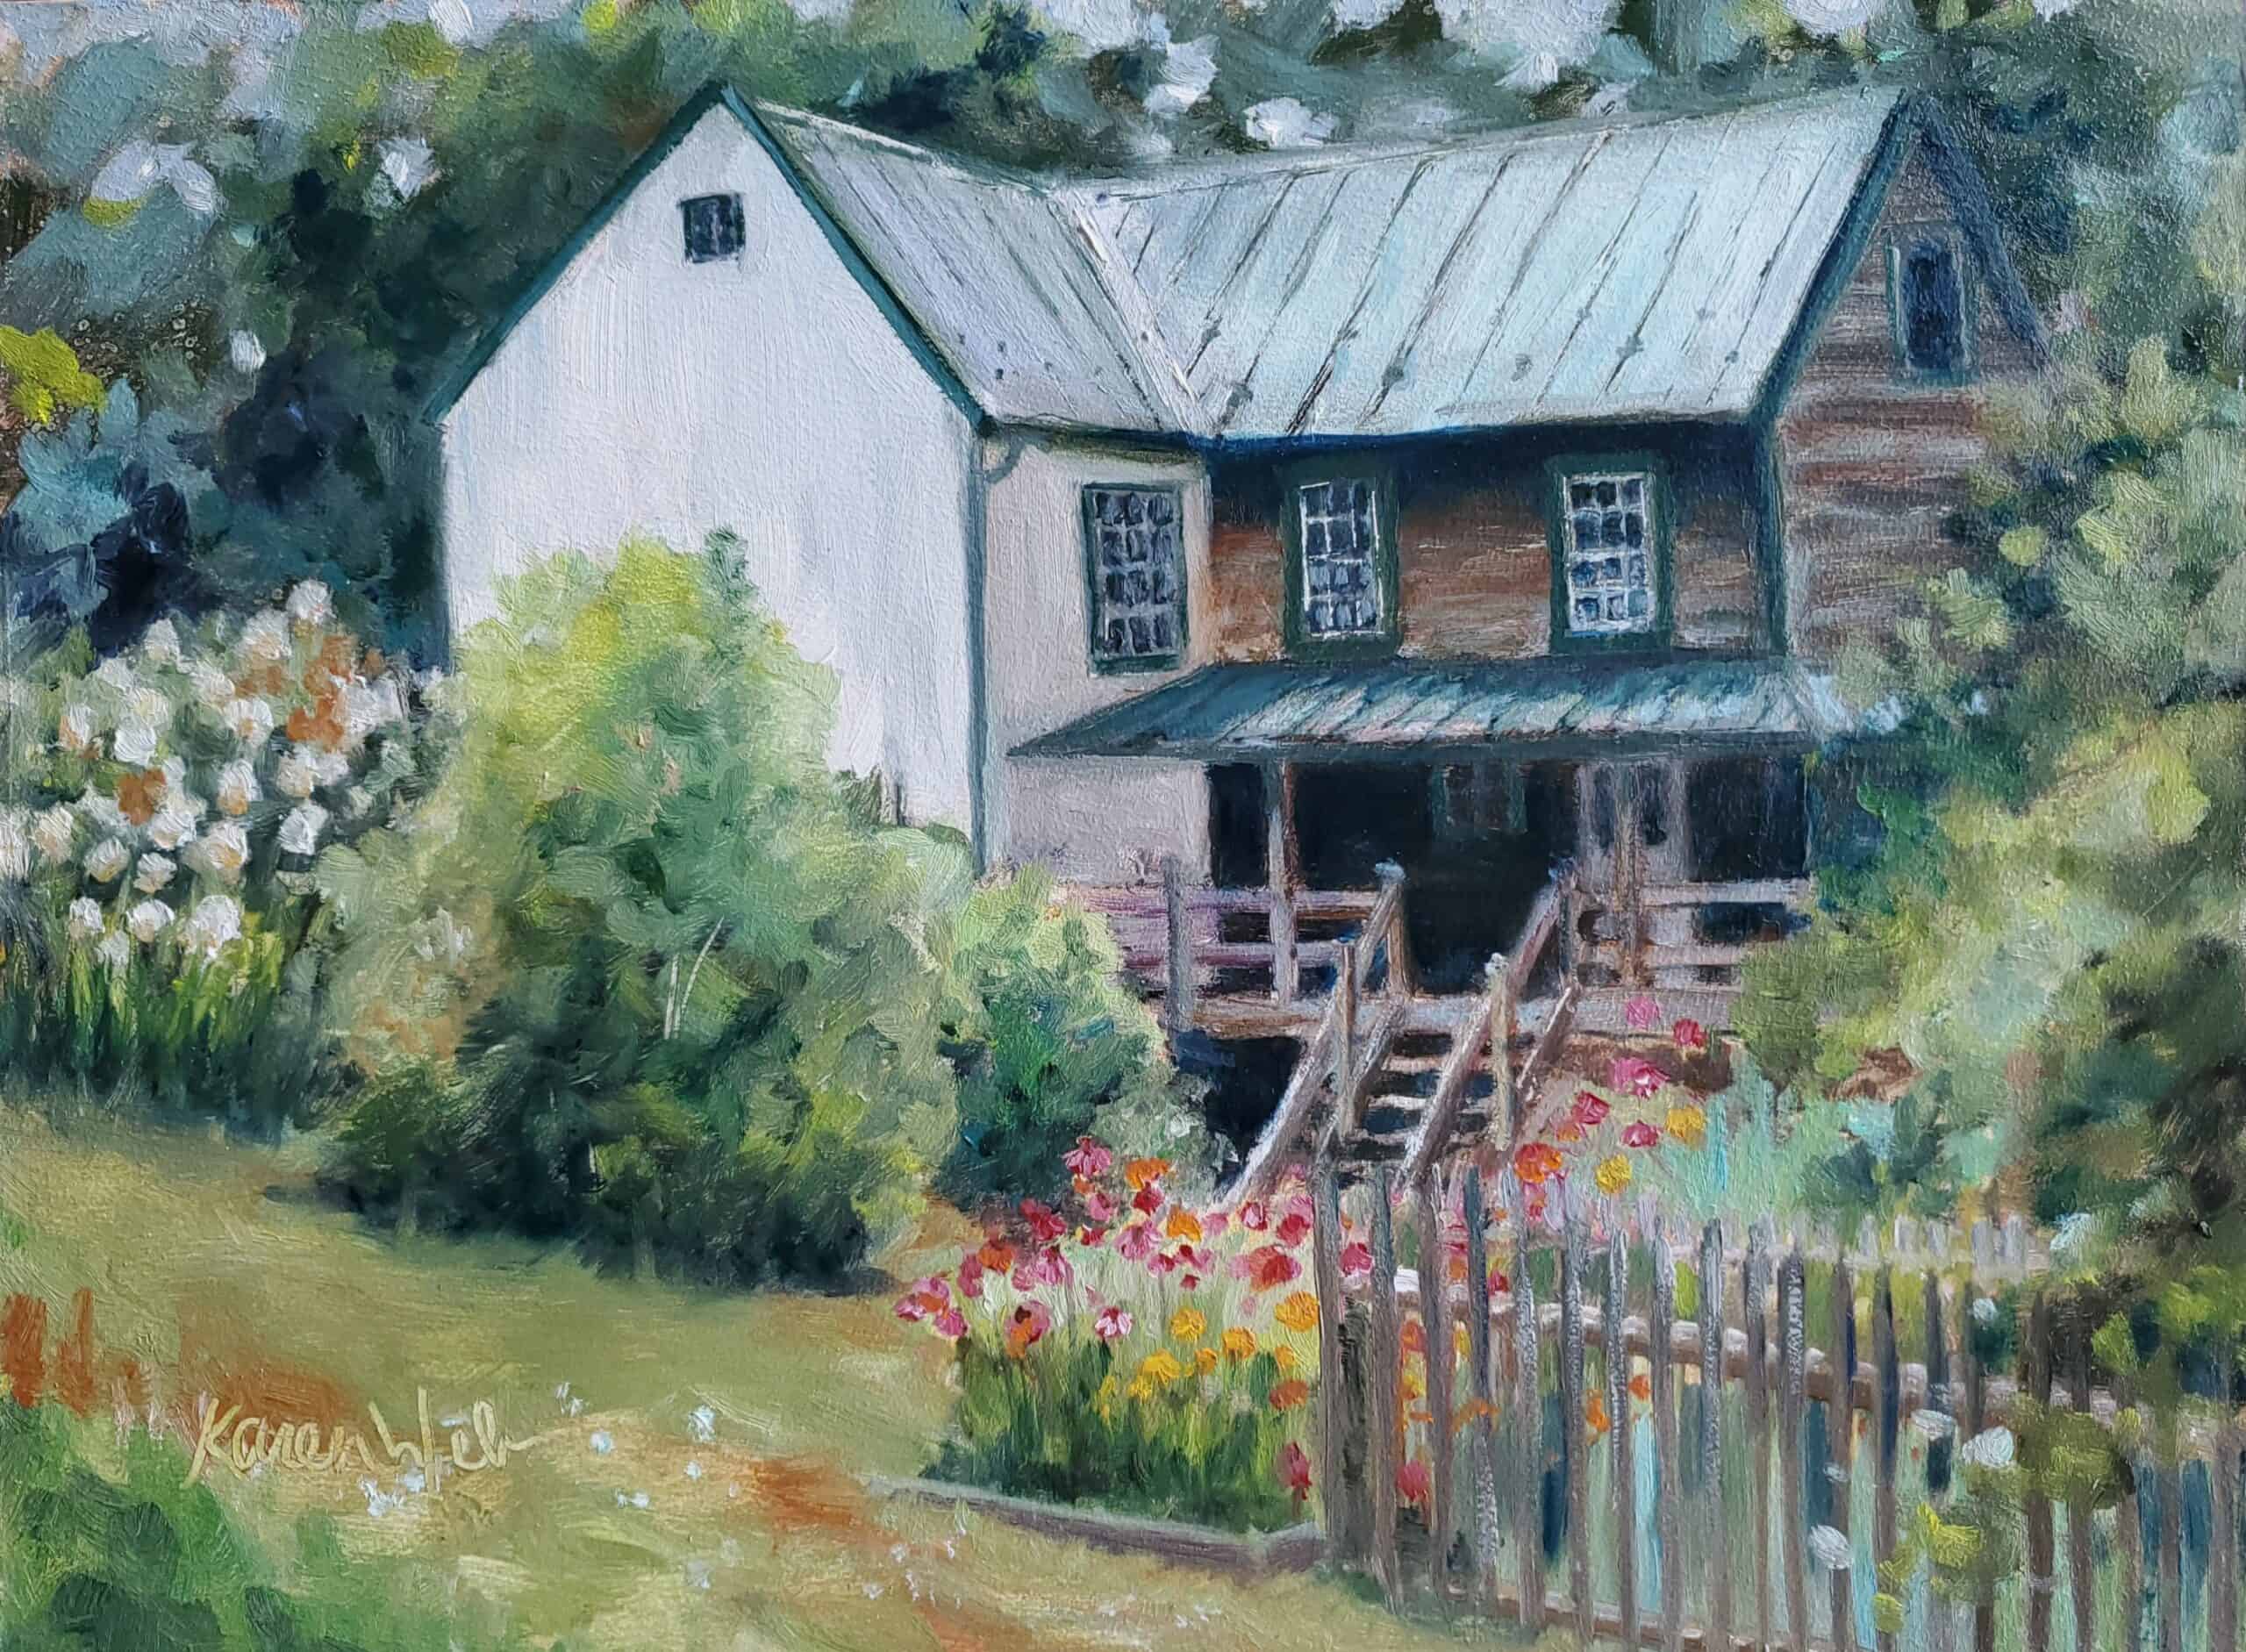 Painting by artist Karen Weber of the tenant house and gardens at Crow's Nest Preserve